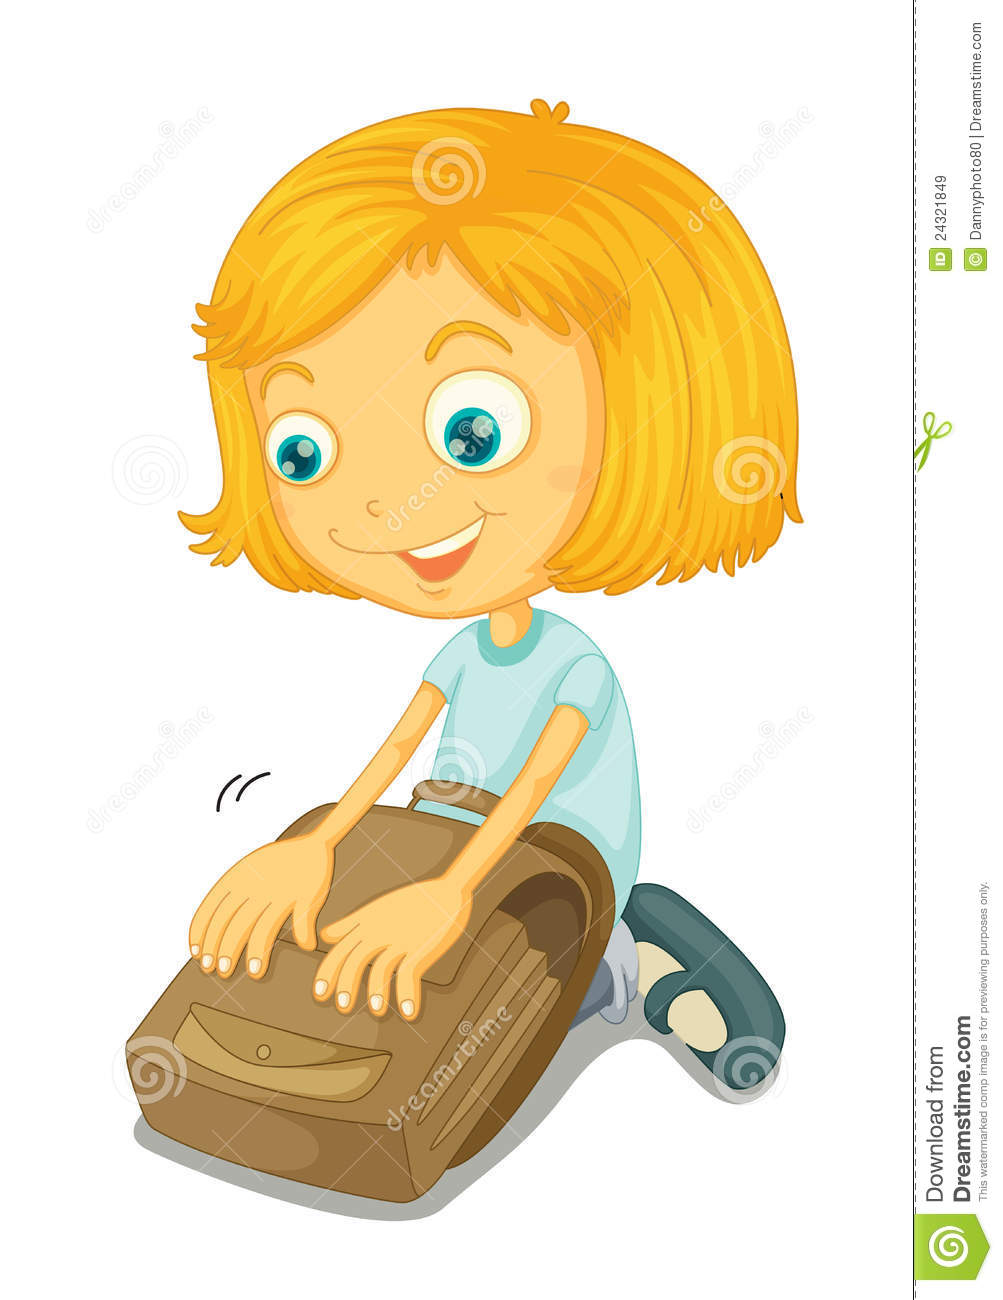 Packing Bag Royalty Free Stock Images   Image  24321849